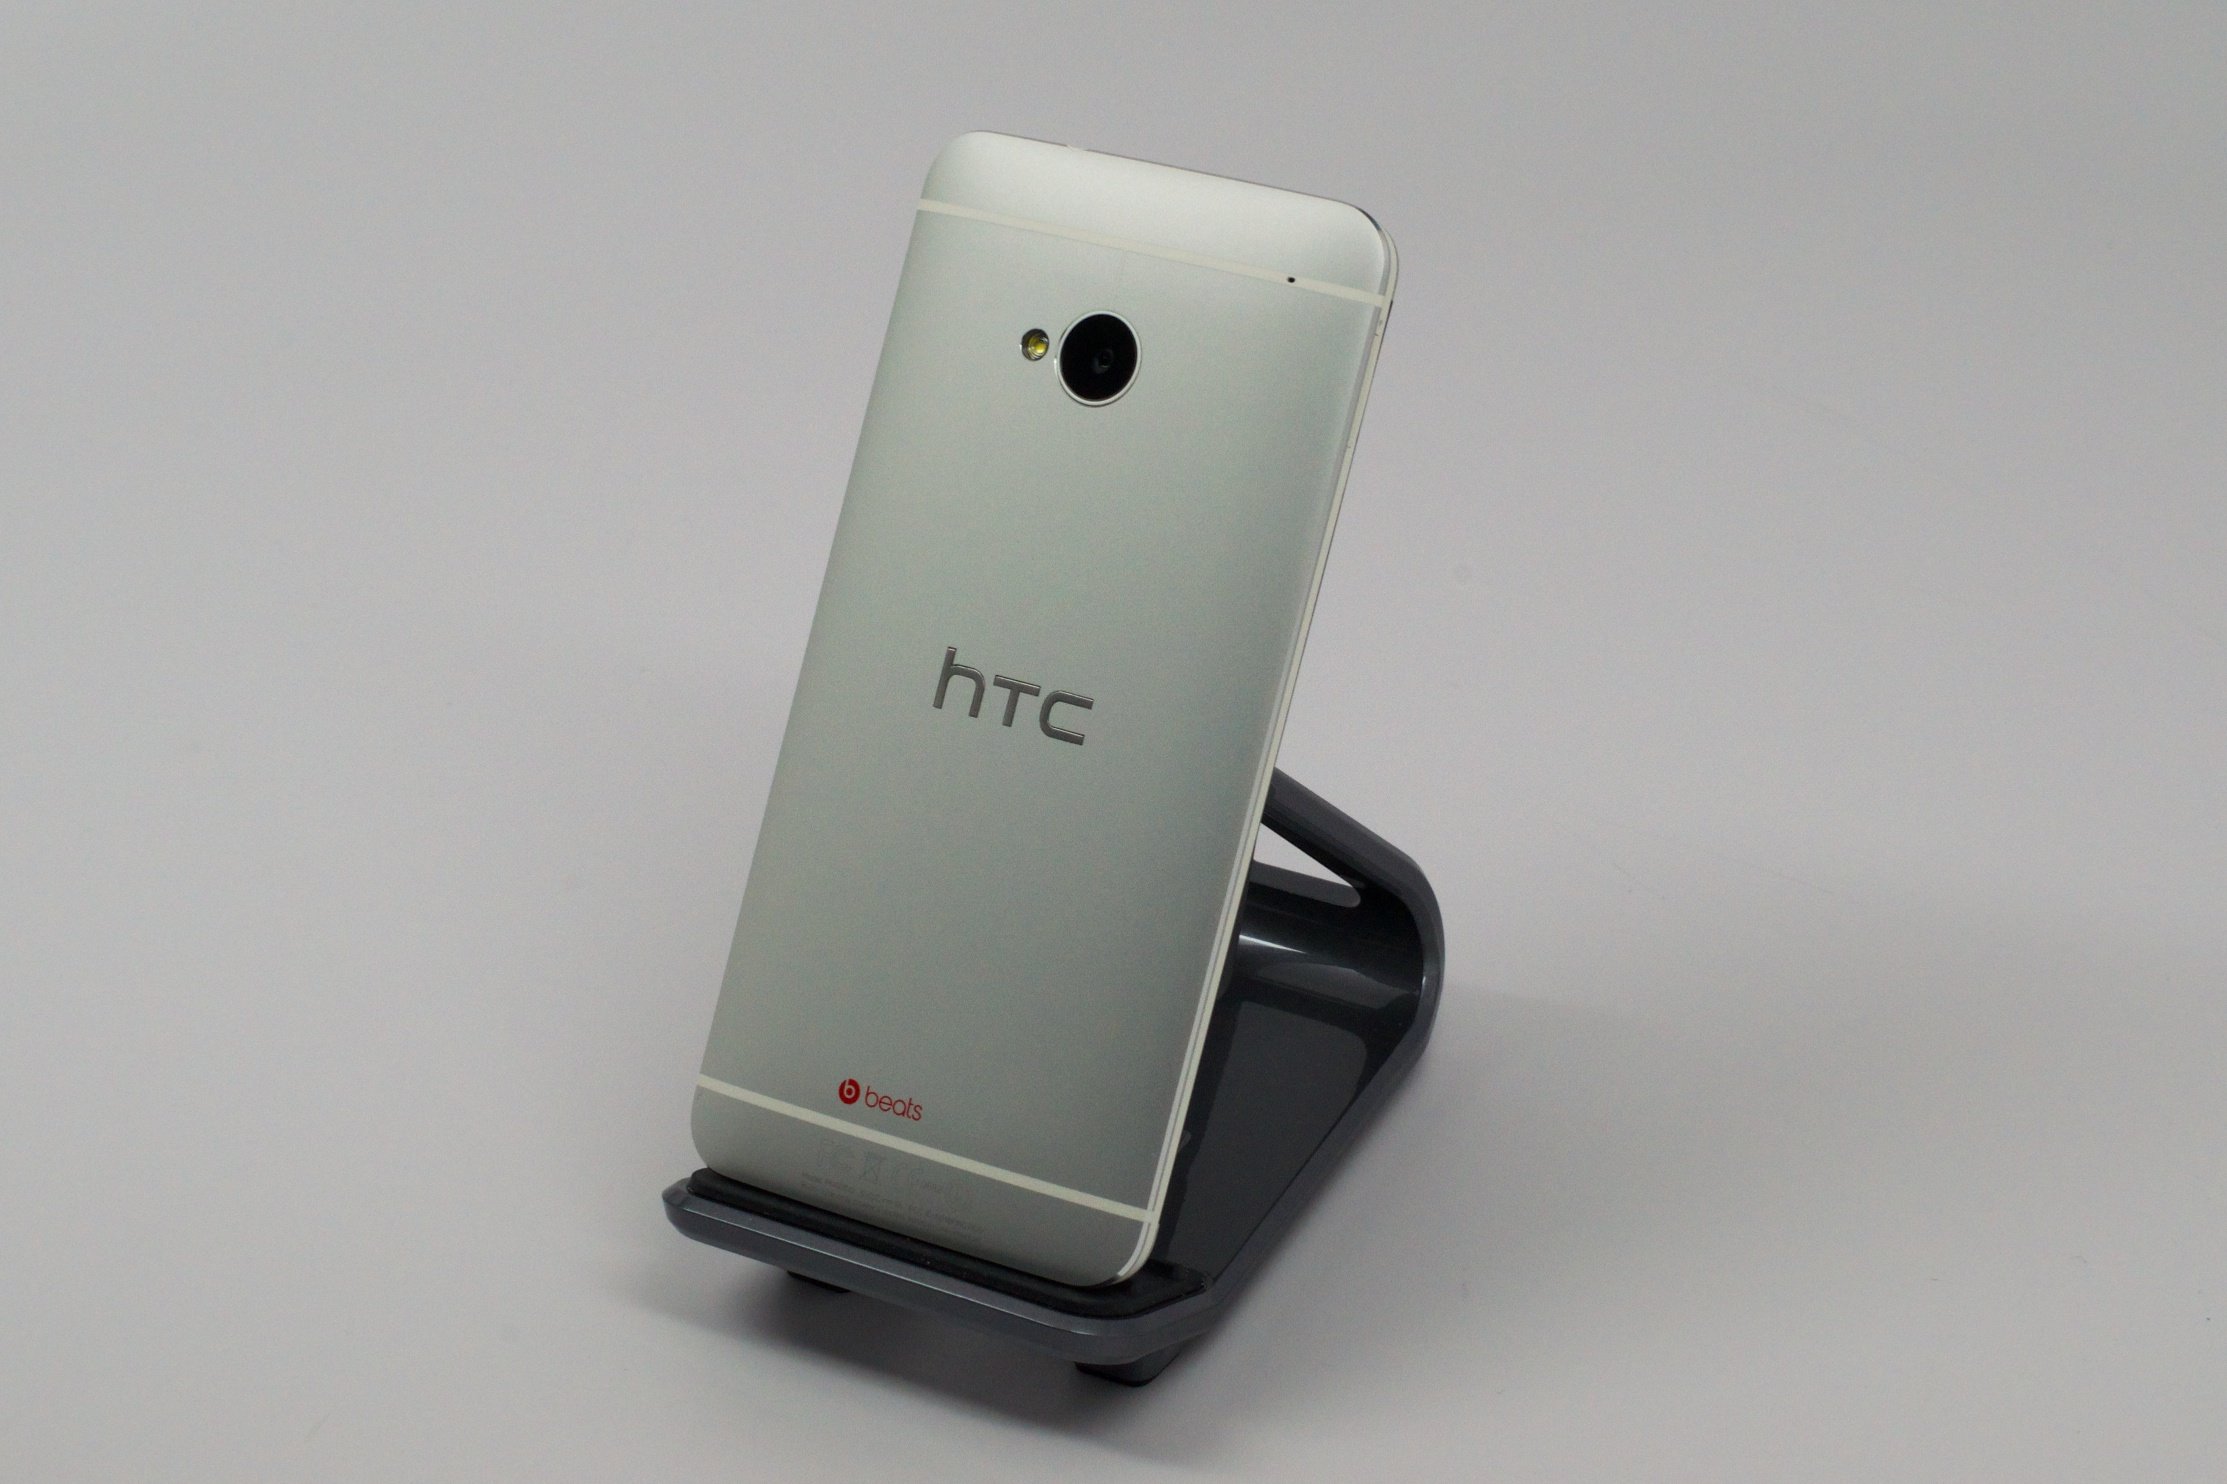 The HTC One features an all metal design that is solid and great-looking.